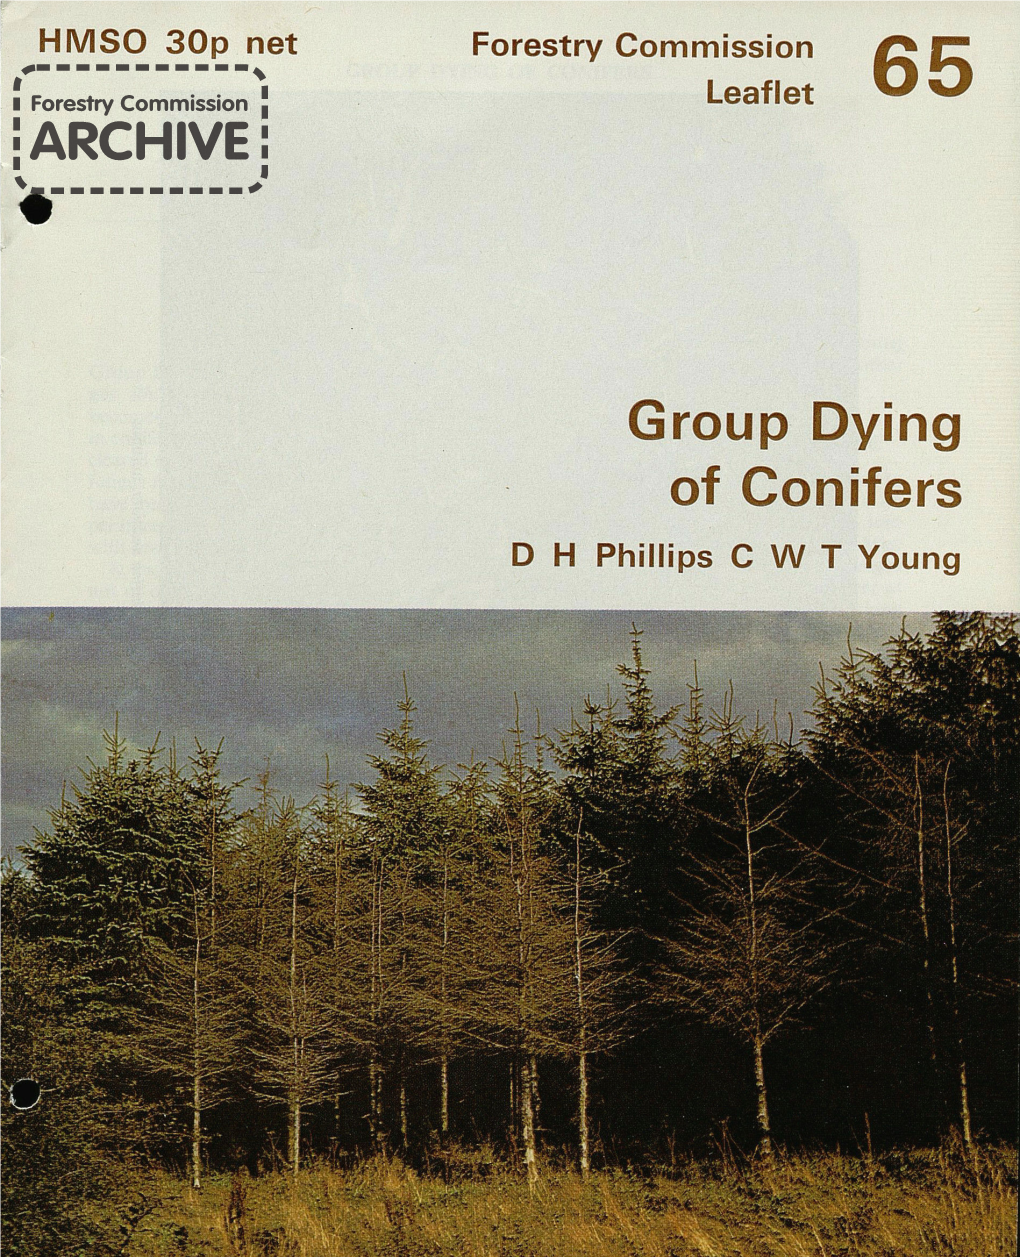 Forestry Commission Leaflet 65: Group Dying of Conifers. (1976)